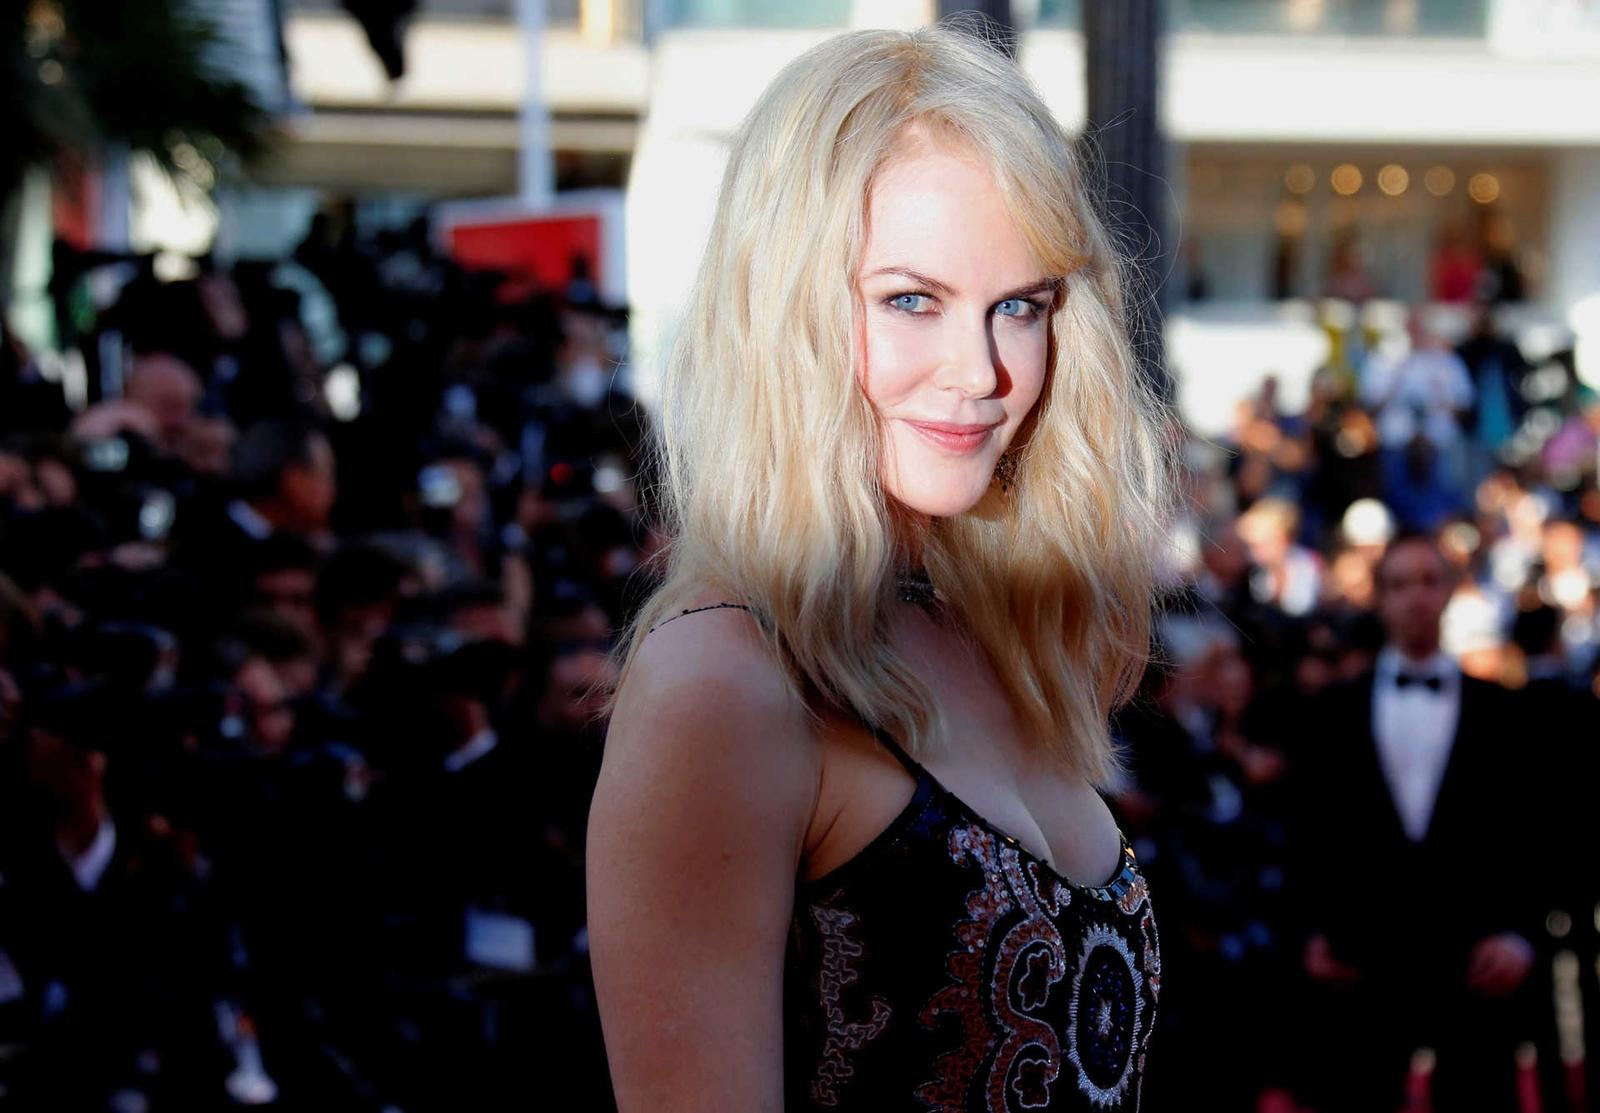 70th Cannes Film Festival – Event for the 70th Anniversary of the festival – Red Carpet Arrivals